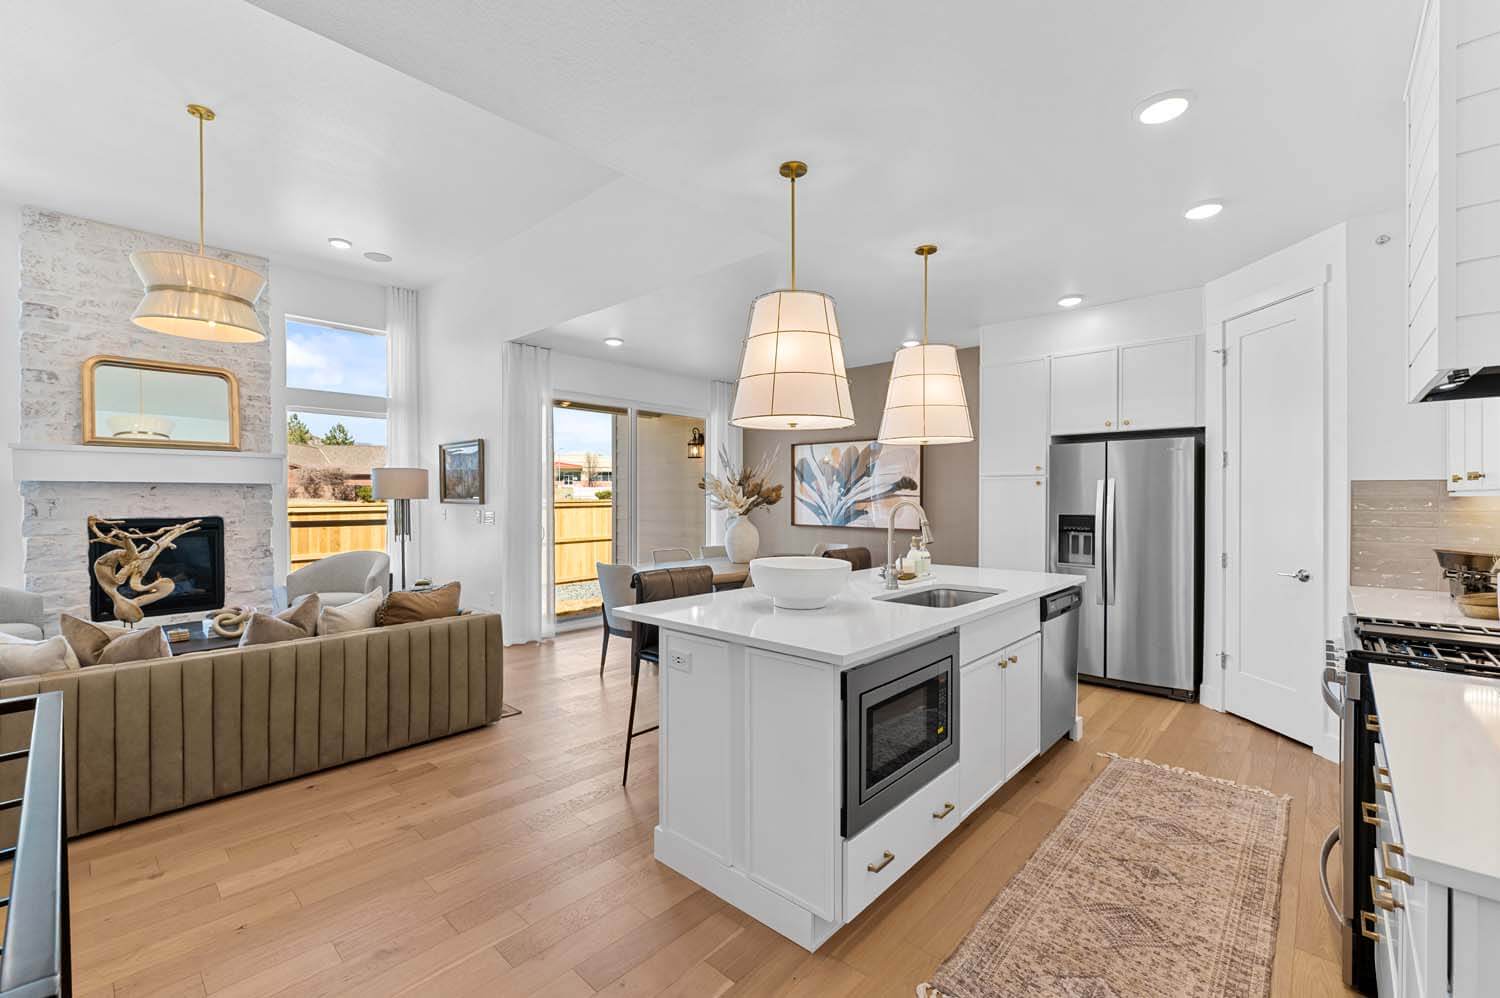 The open-concept floorplan has the kitchen facing the great room and the dining room. The rooms have white walls and light-colored wood floors.